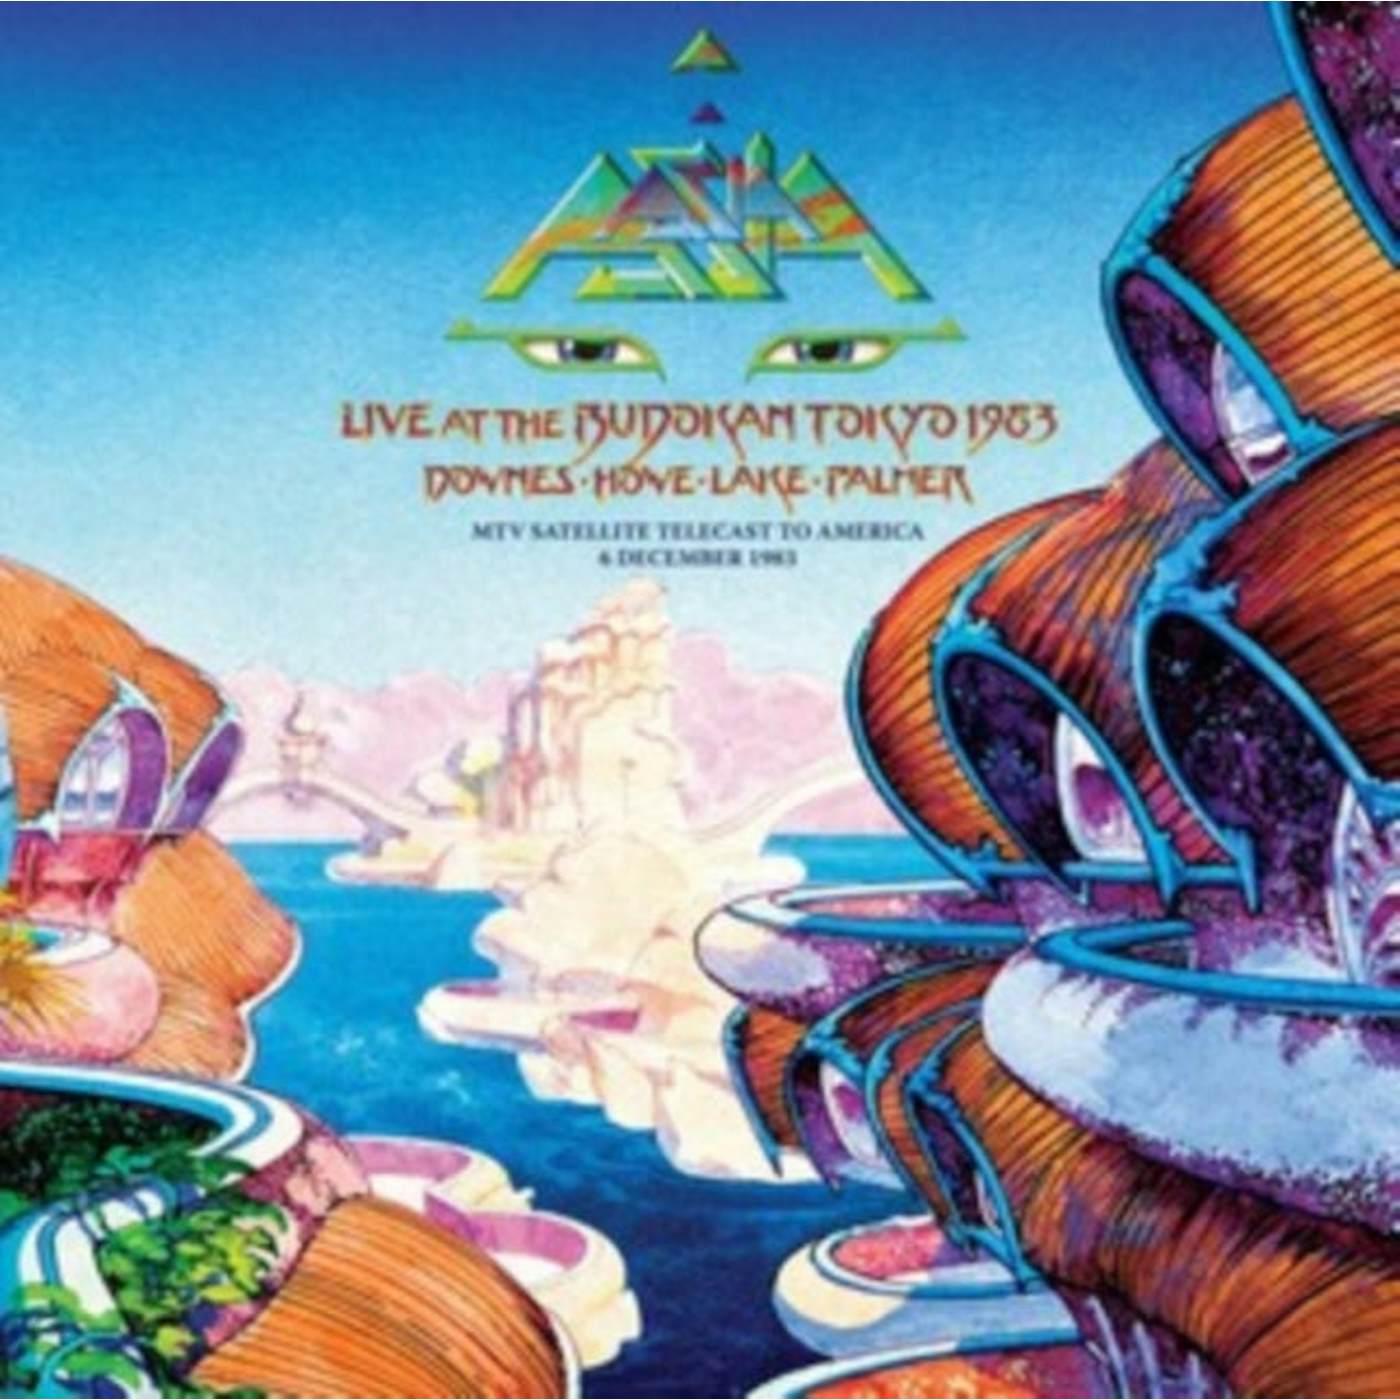 Asia LP Vinyl Record - Asia In Asia - Live At The Budokan / Tokyo / 19 83 (Deluxe Box Set)